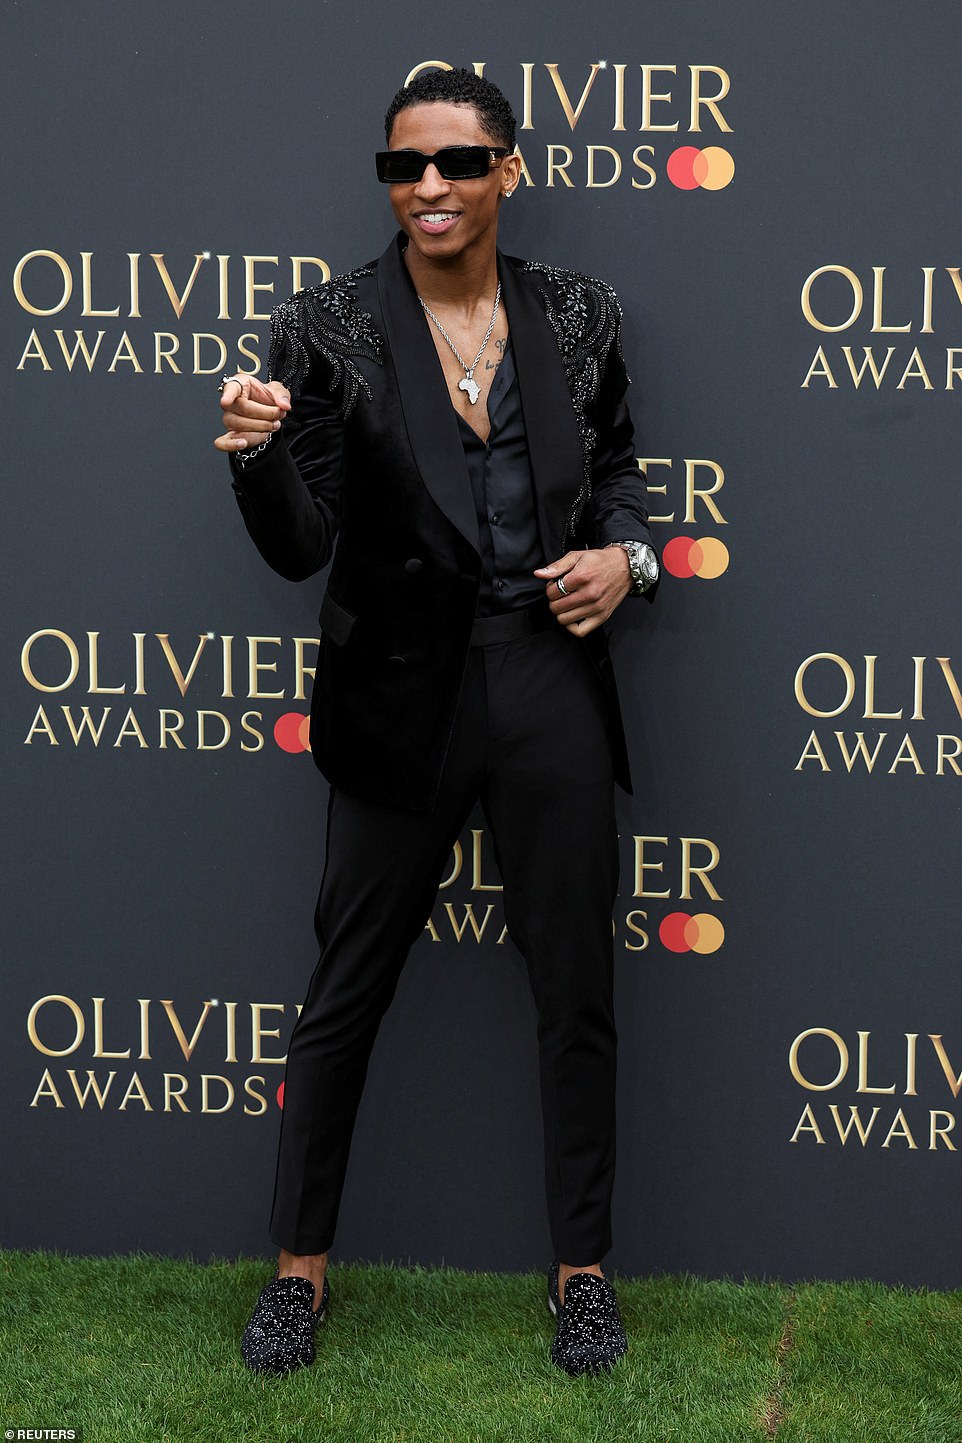 Myles Frost caught the eye in a black velvet jacket with beaded detailing over a silk shirt, which he left partially unbuttoned, and sported sunglasses